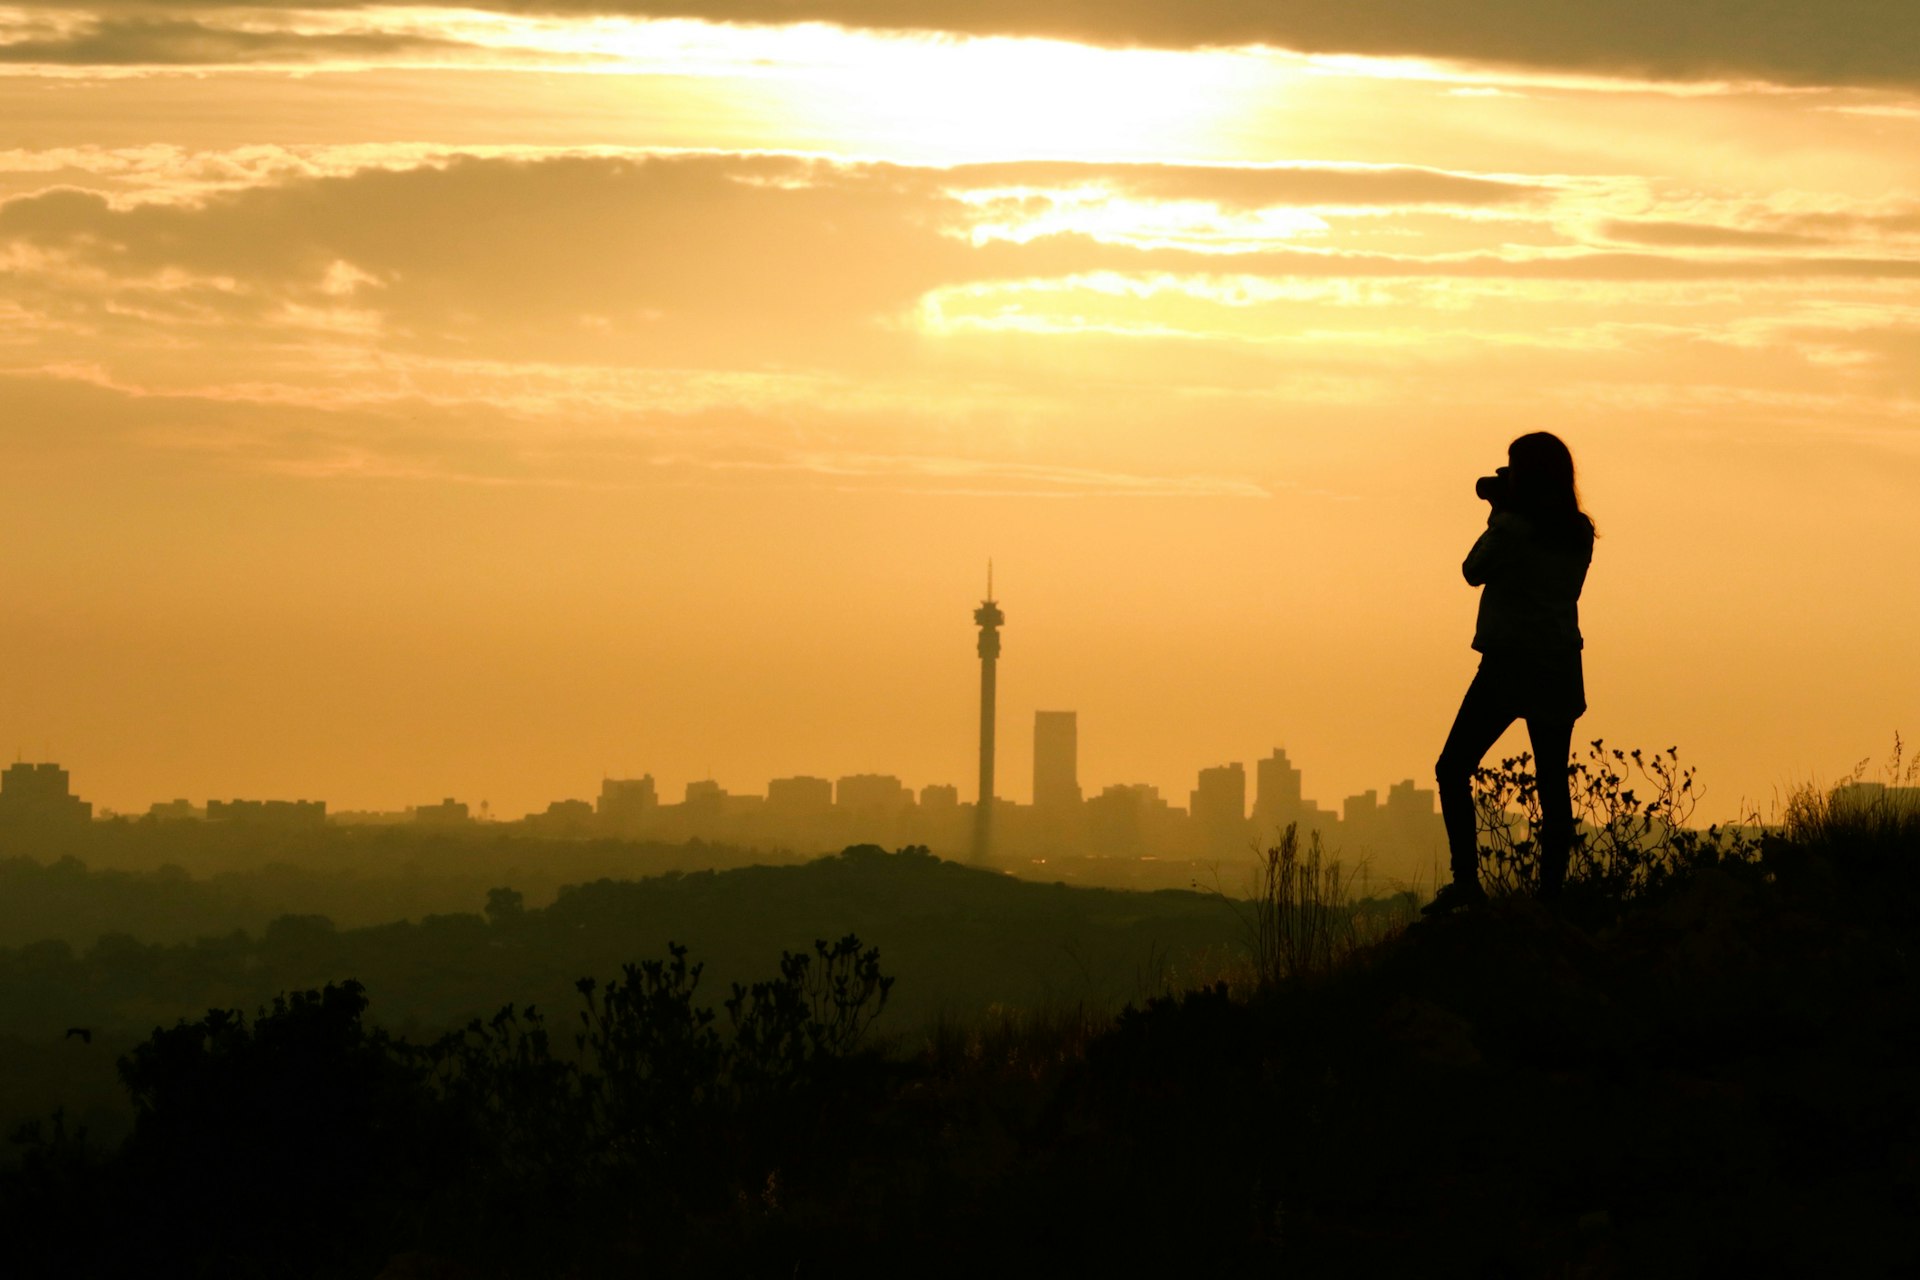 A woman in silhouette takes a photograph of the setting sun and Johannesburg city skyline in the distance